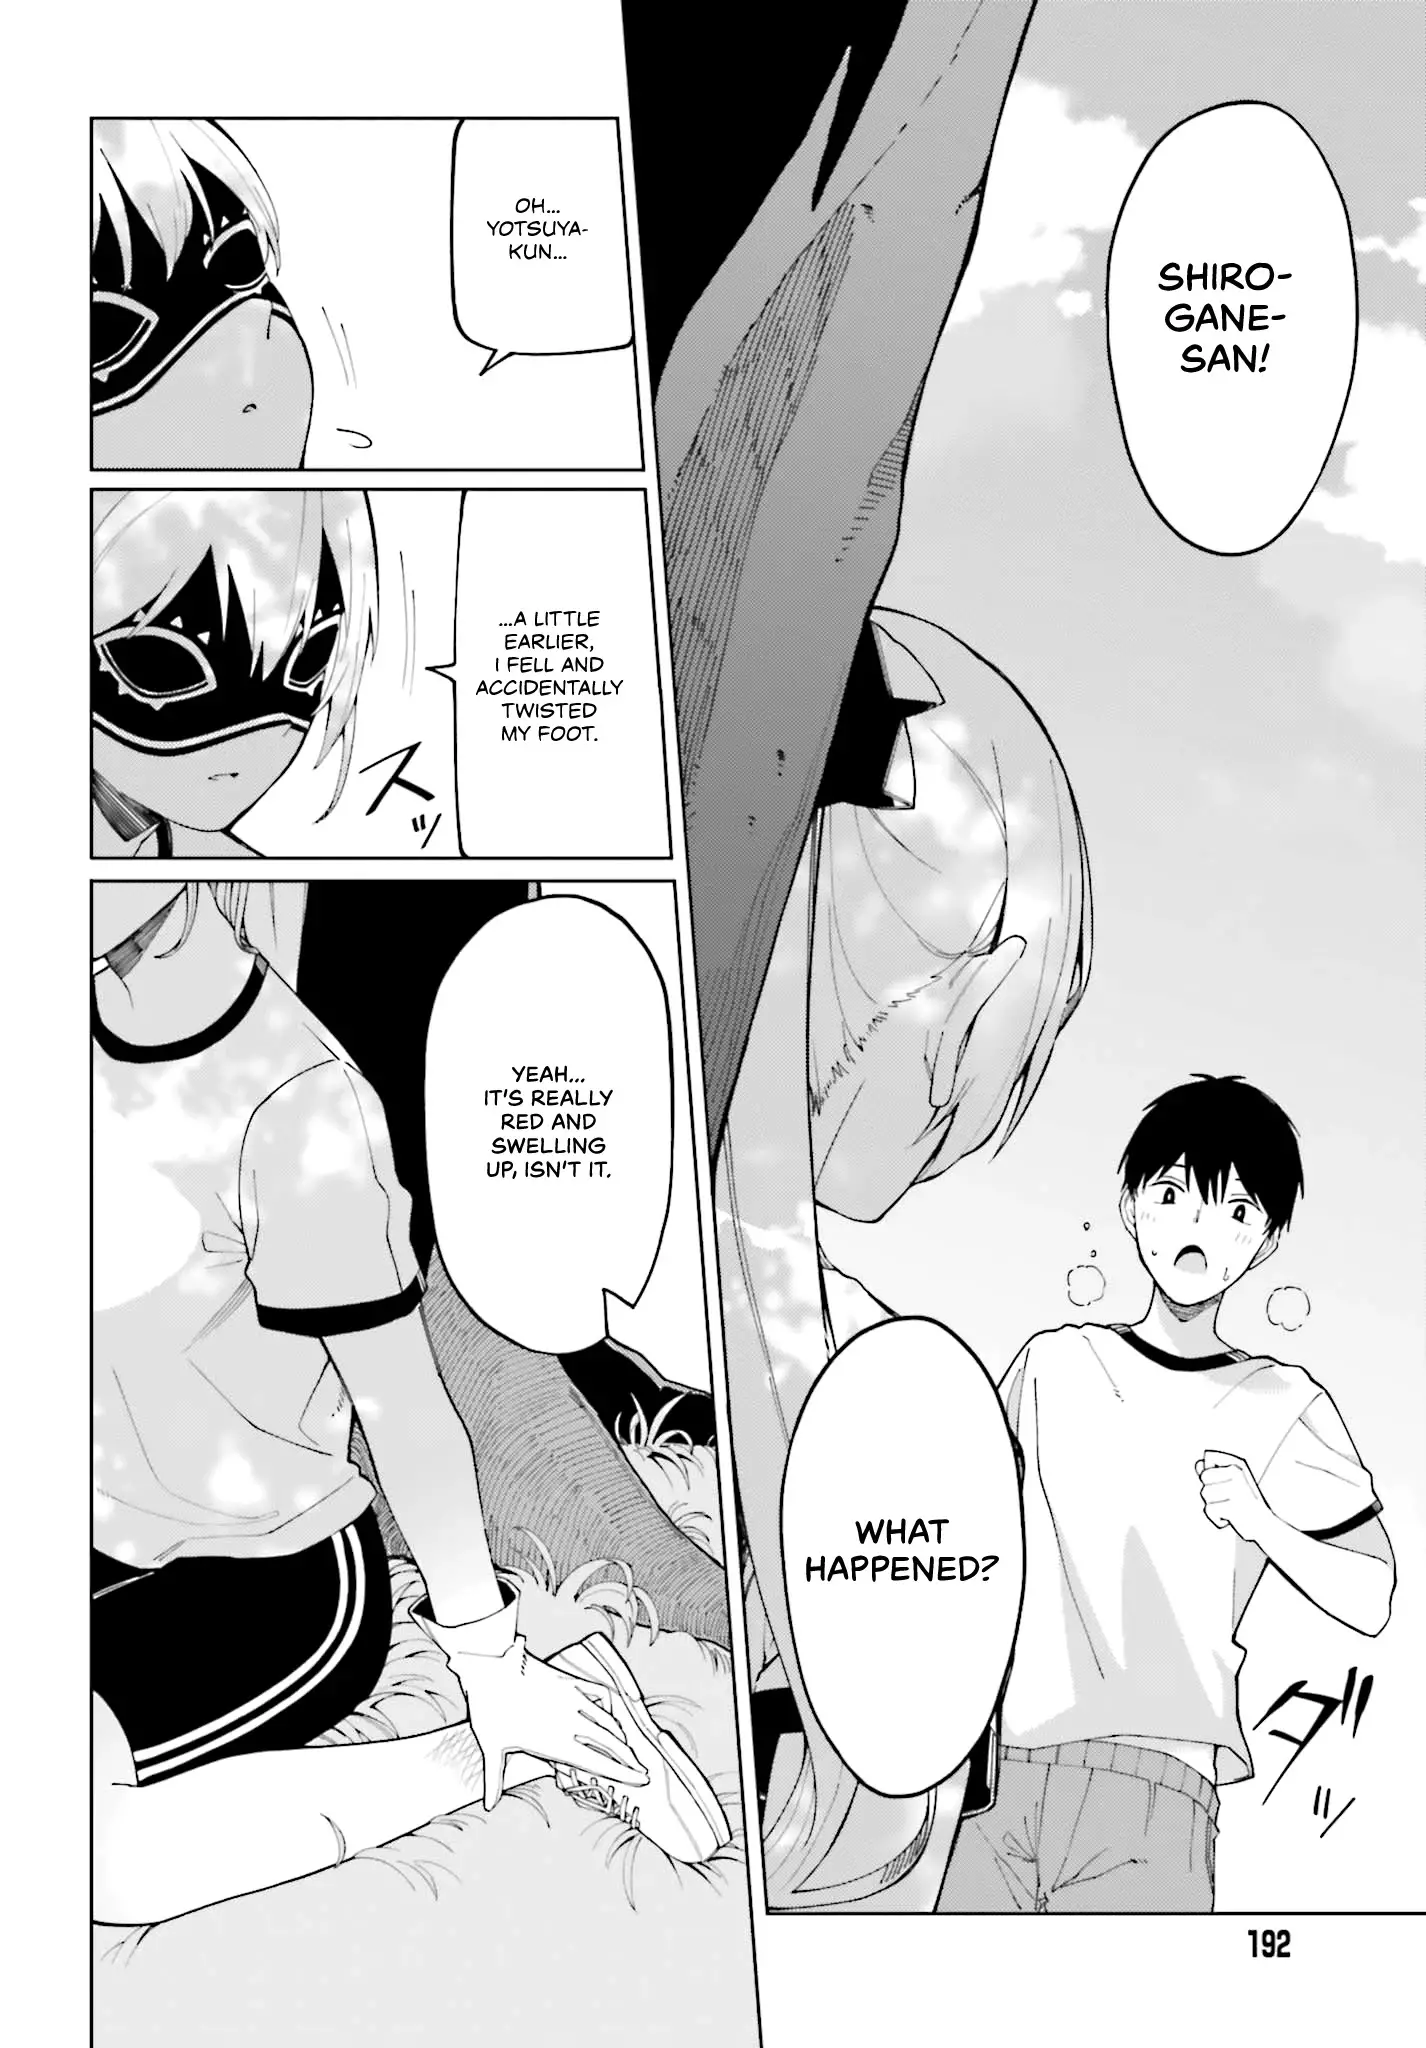 I Don't Understand Shirogane-San's Facial Expression At All - 2 page 8